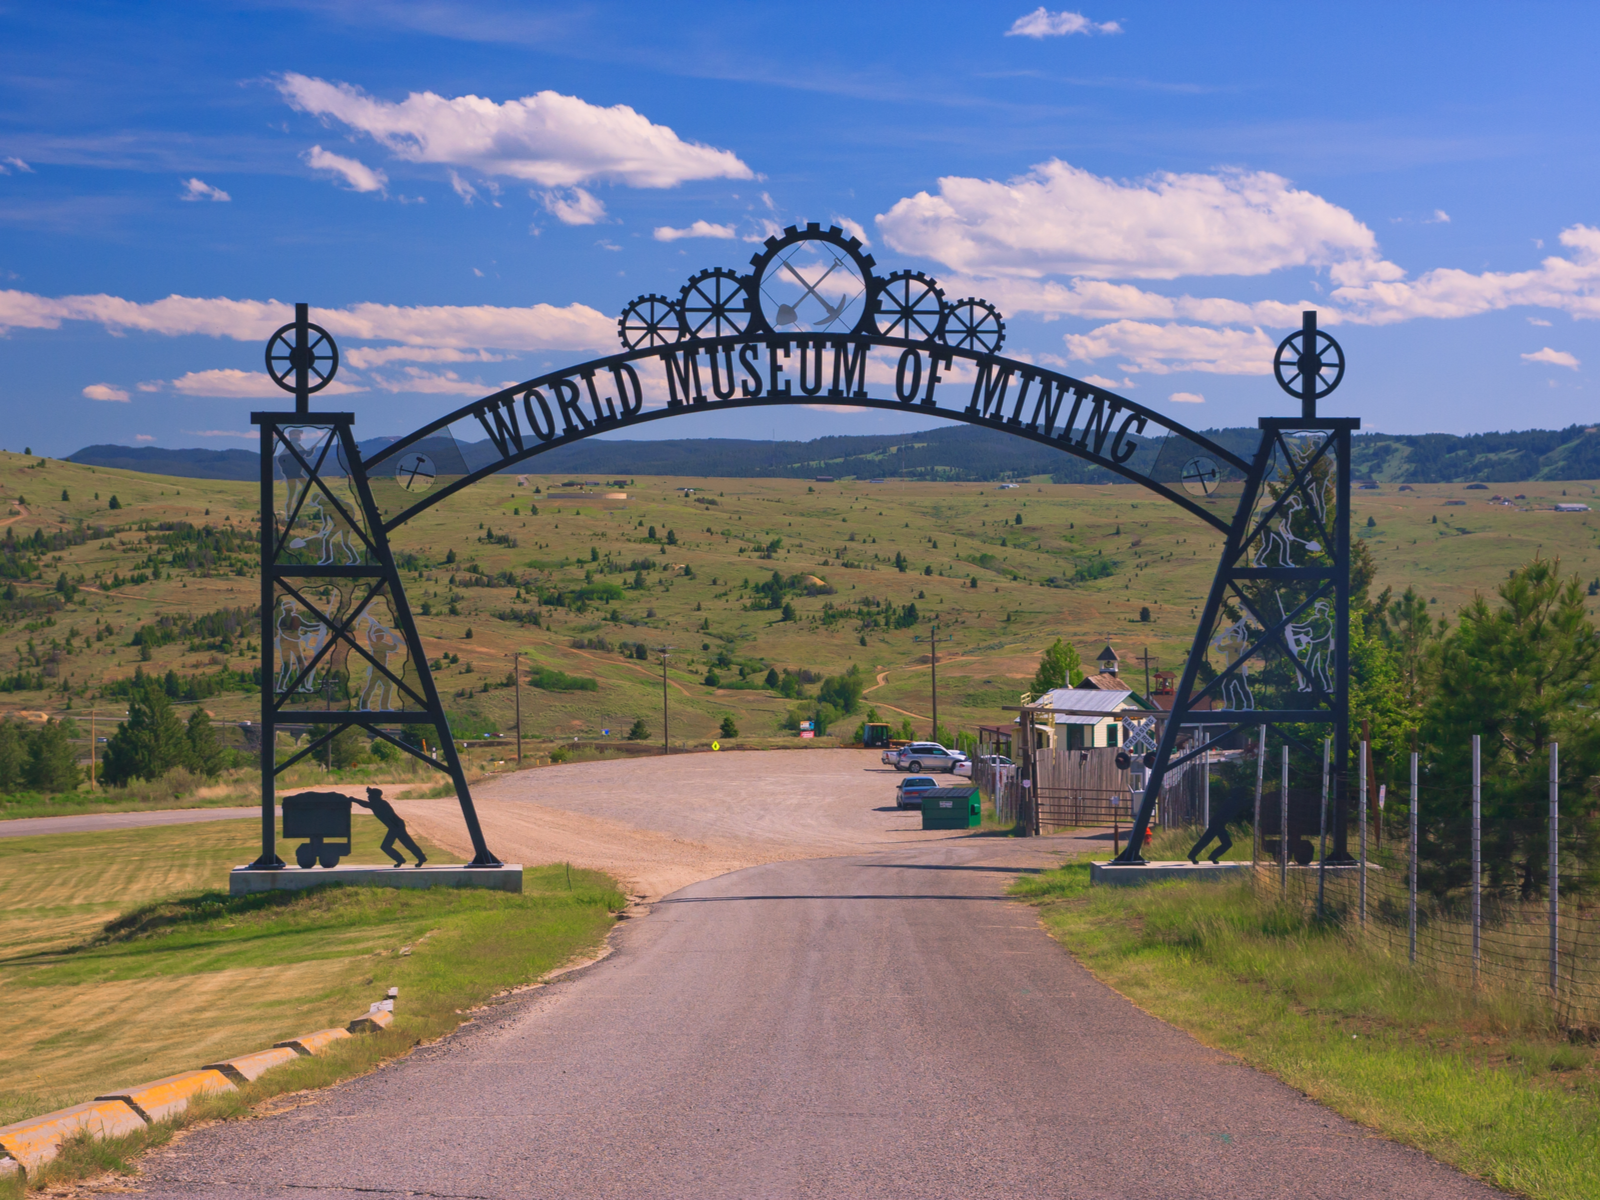 A creative welcome arch with gears and pictures of miners performing regular tasks at World Museum of Mining, our pick on one of the best things to do in Montana